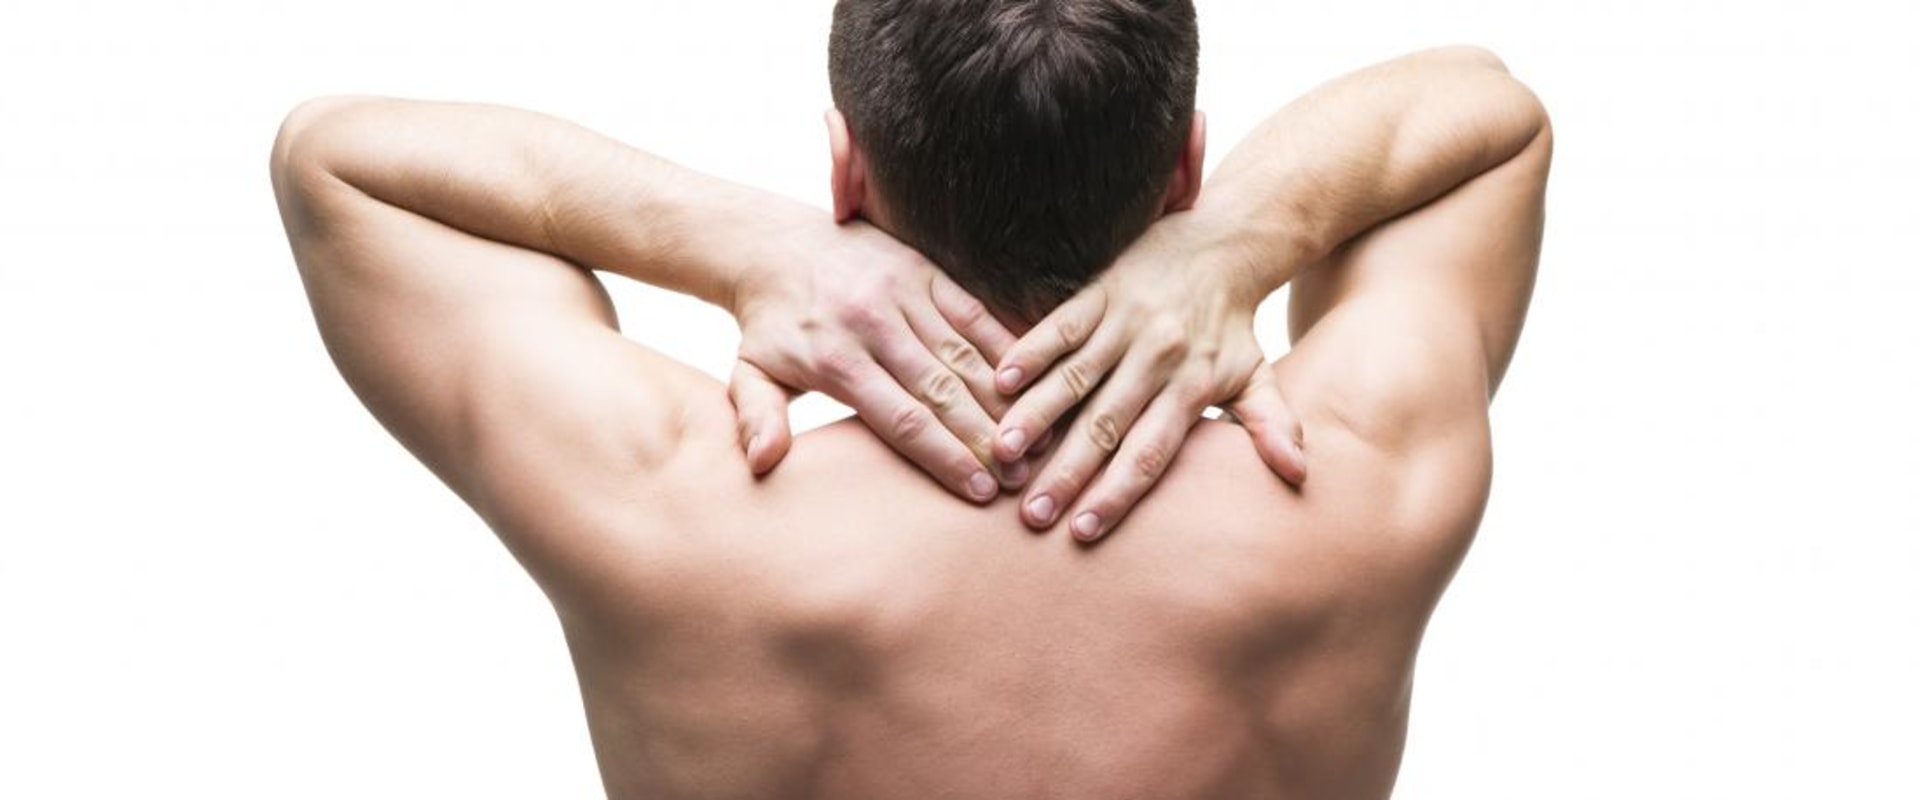 Can strained back muscles cause chest pain?